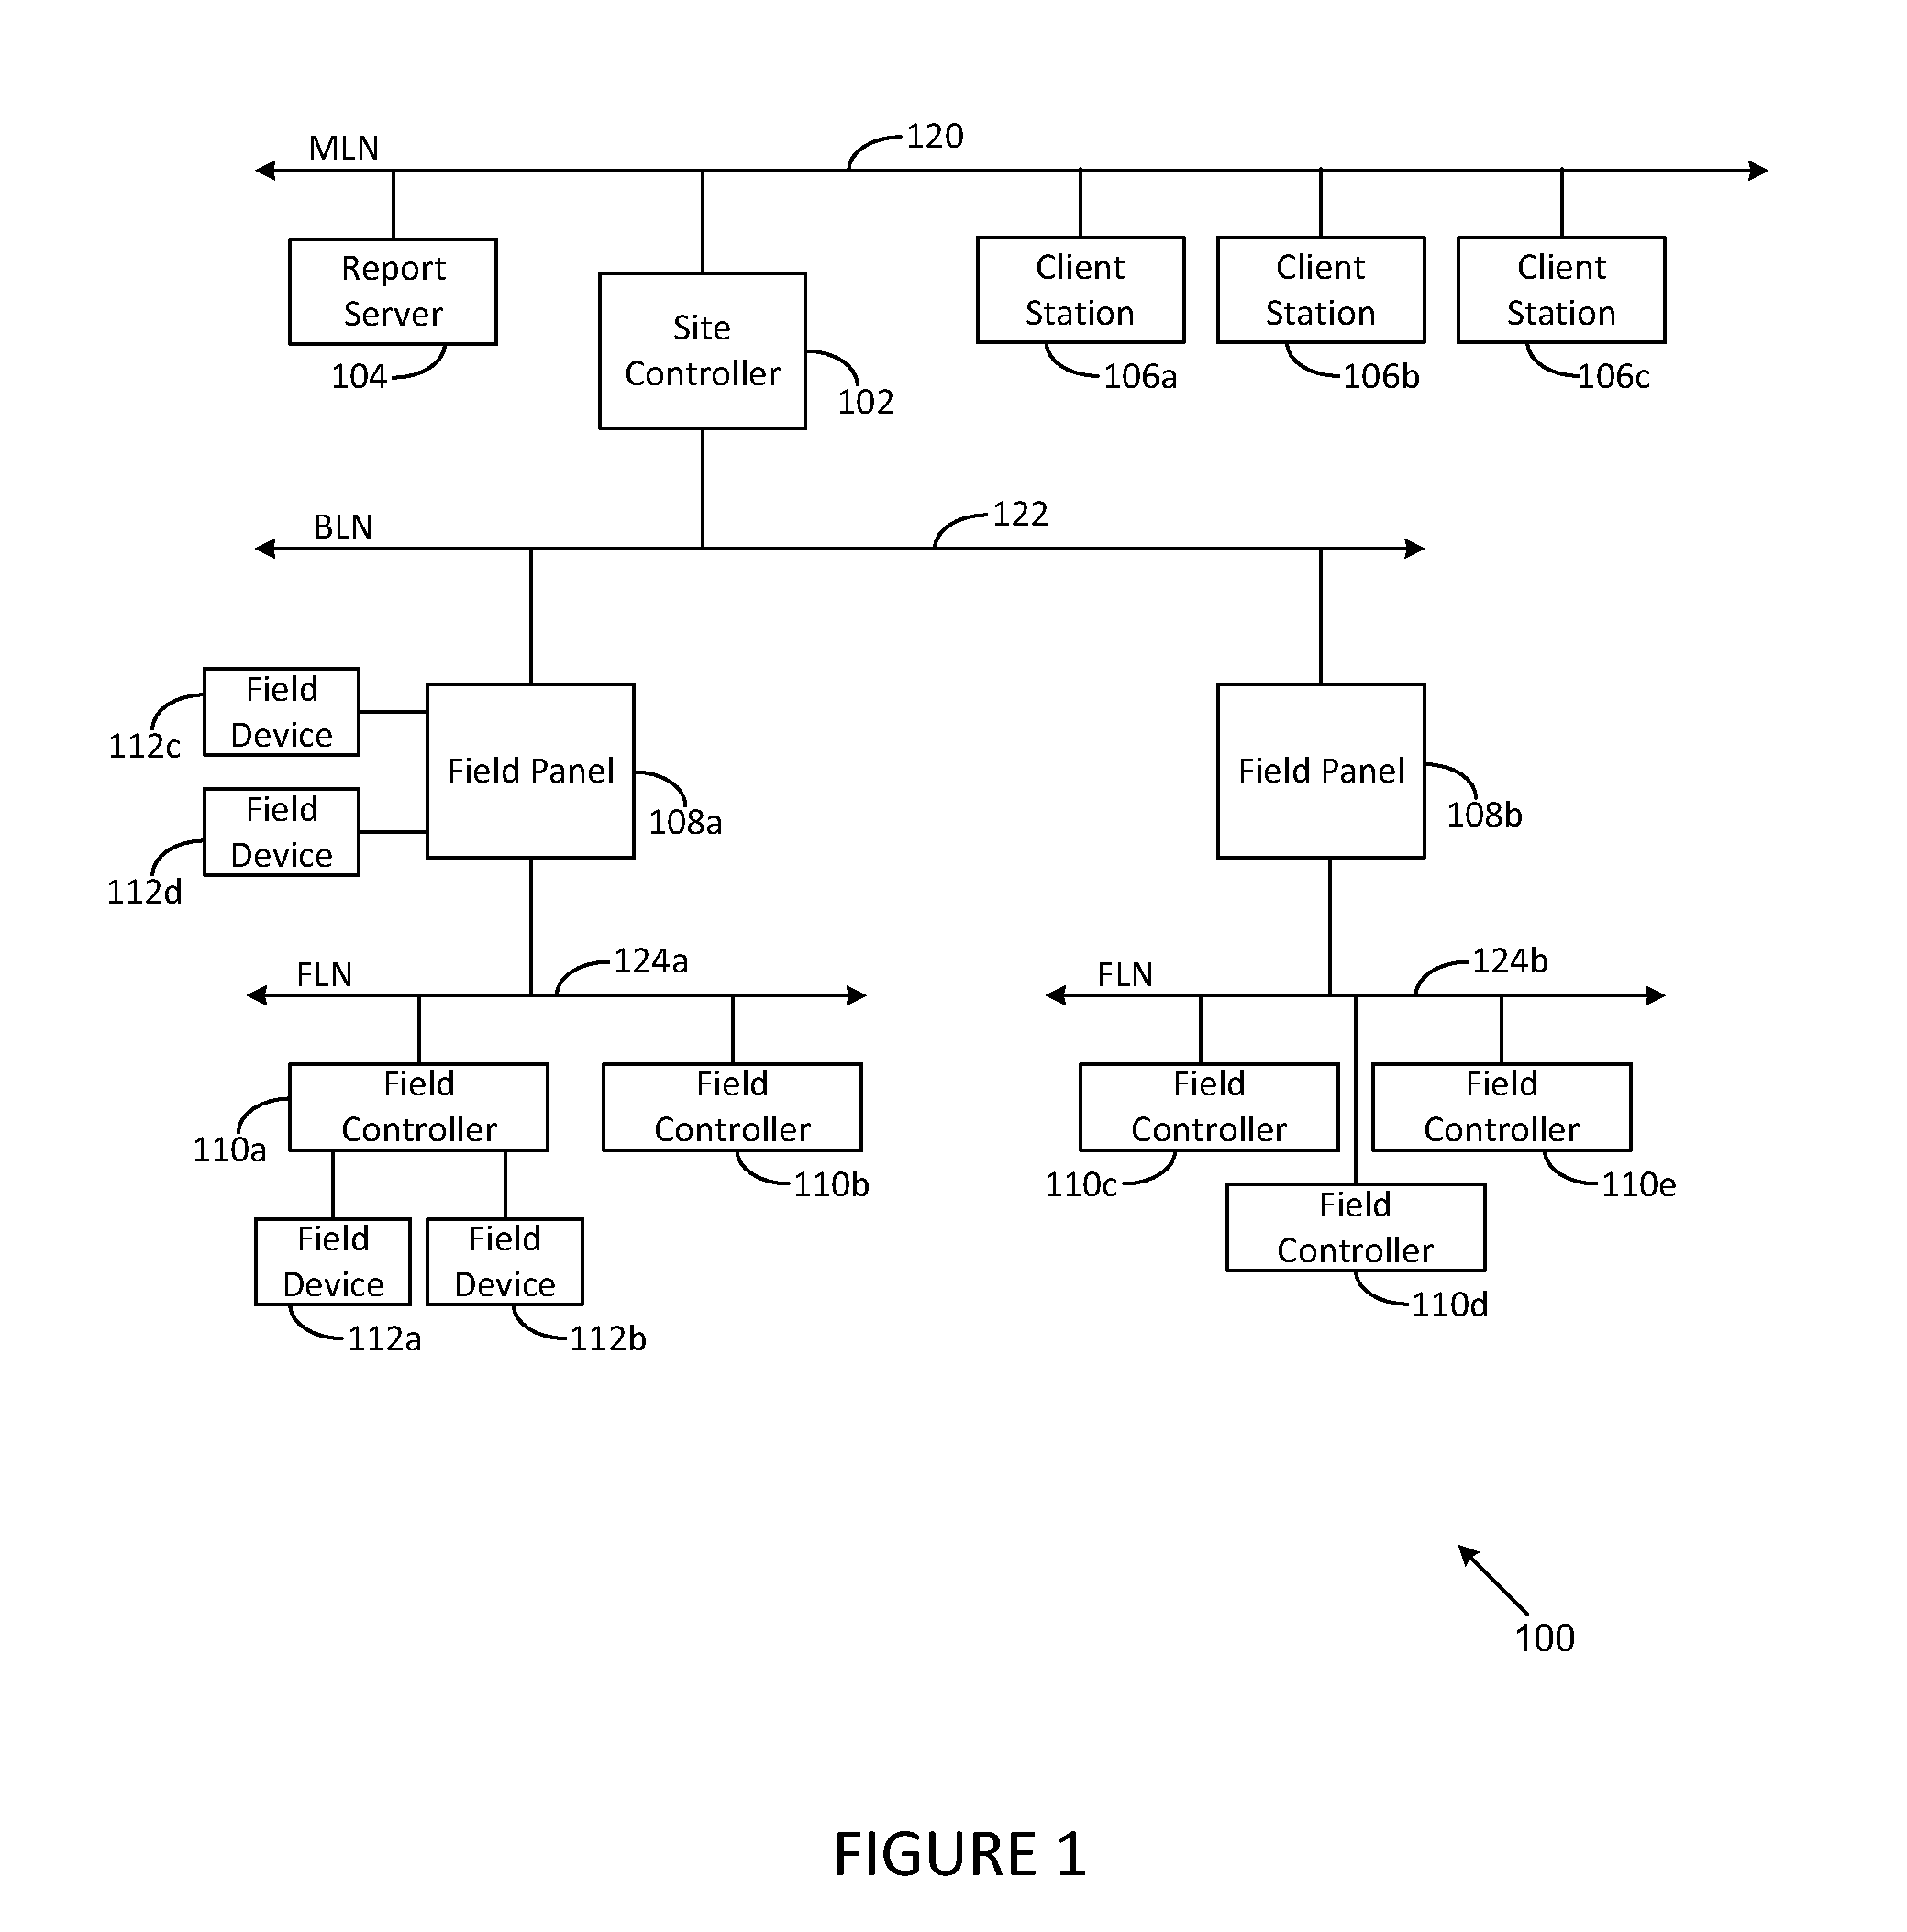 Method and system for improving energy efficiency in an HVAC system